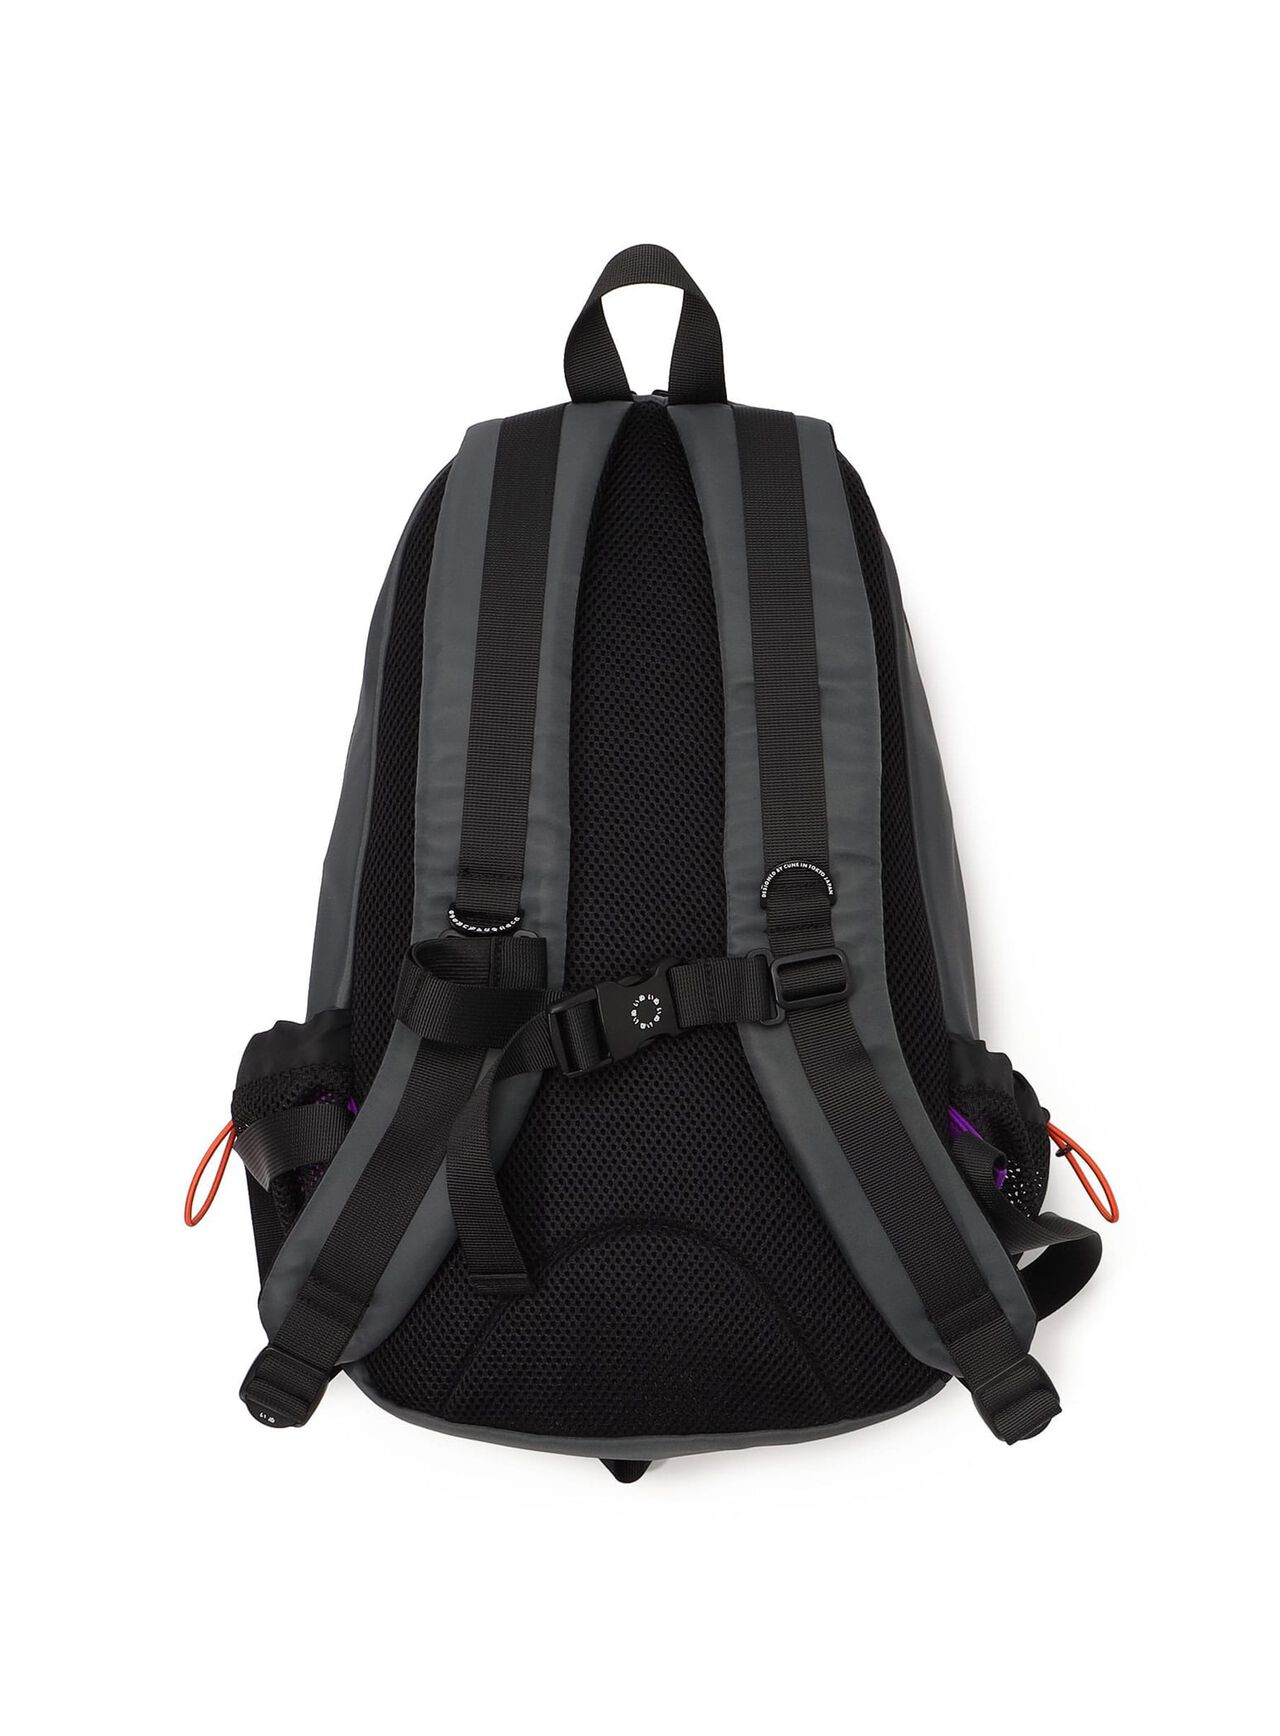 ODC2 Backpack,ONE, large image number 1